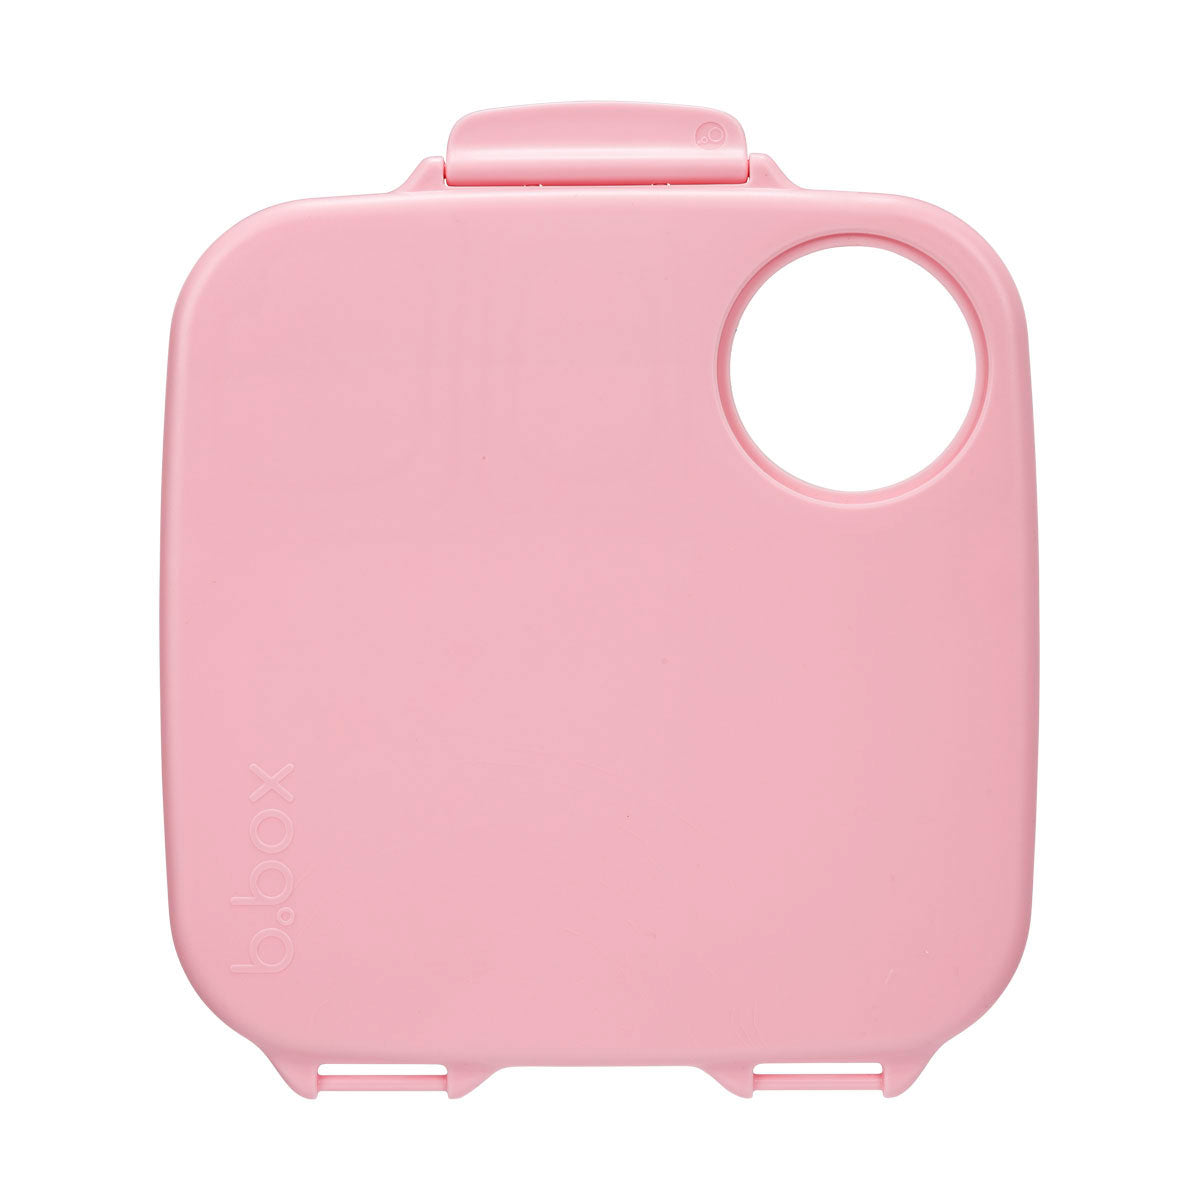 b.box | Lunchbox Spare Parts - Lid